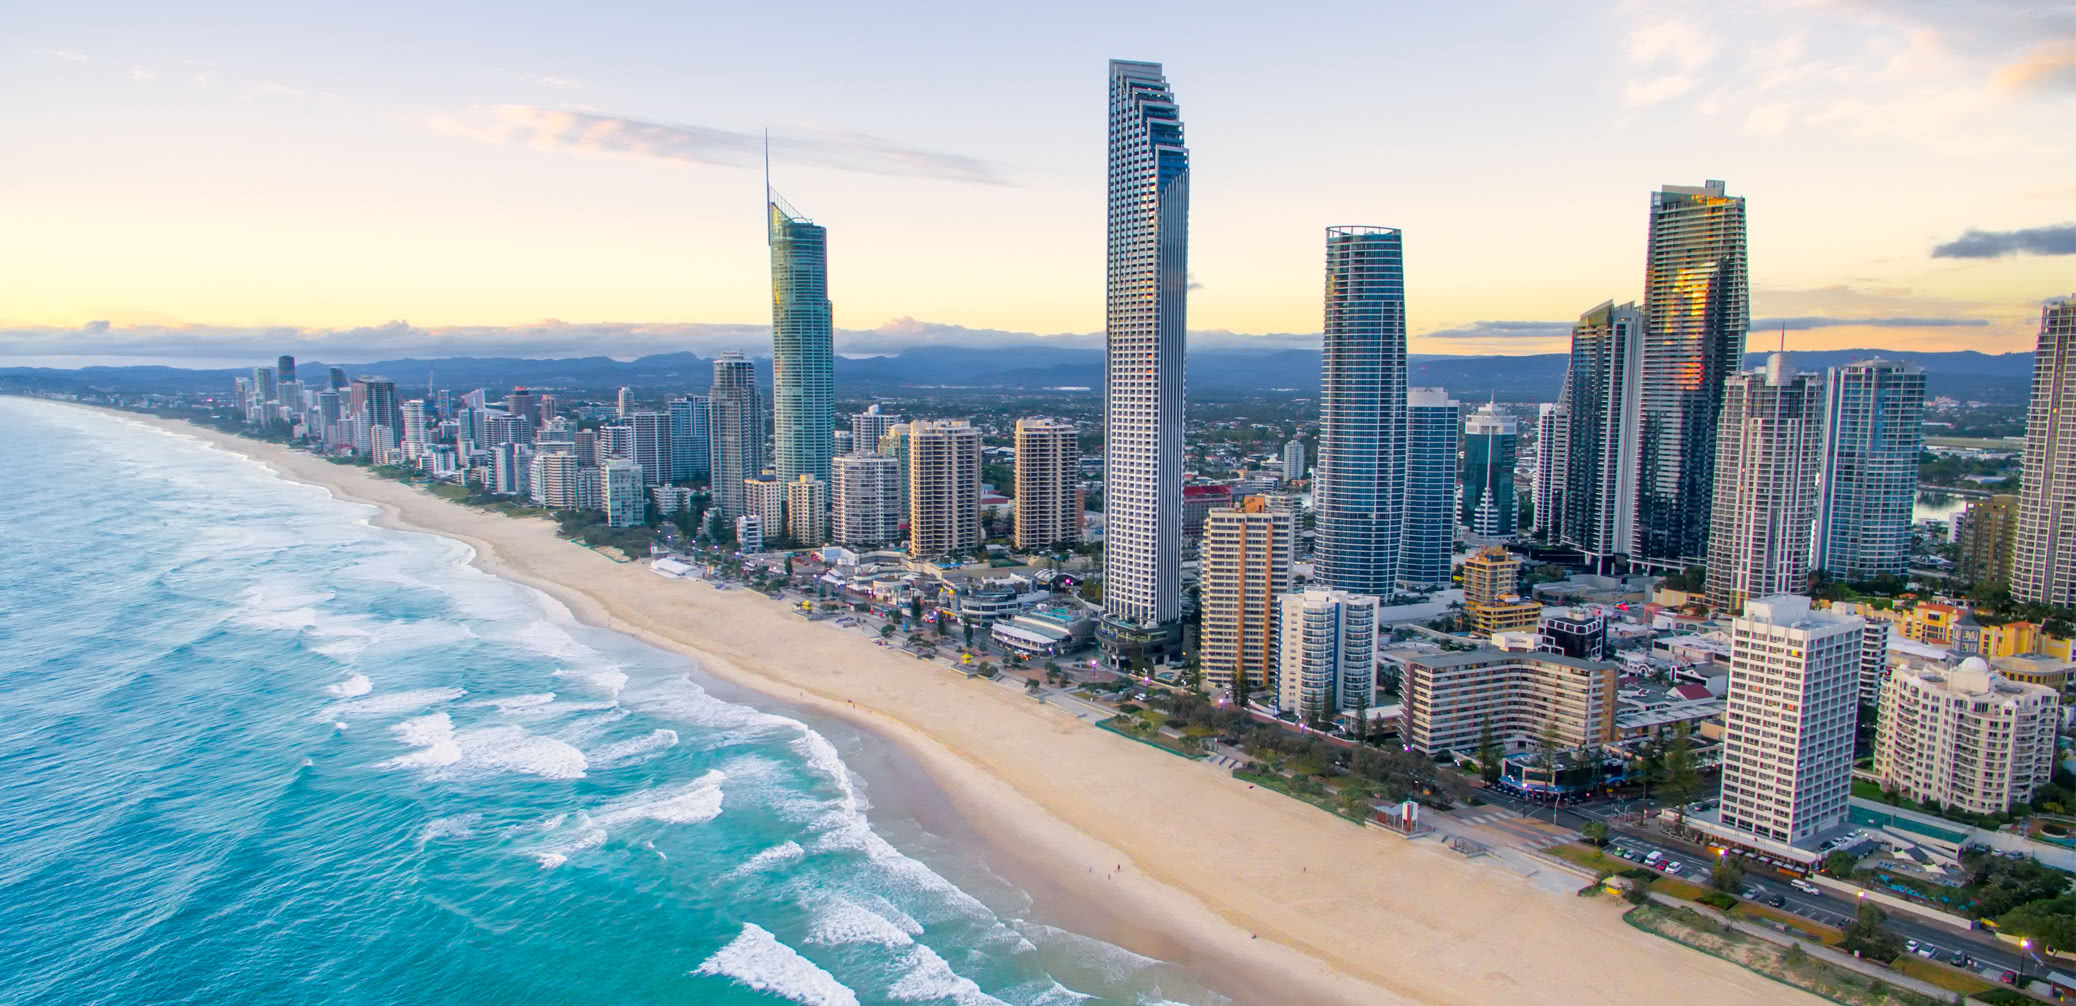 Is There A Four Seasons Hotel In Brisbane Or On The Gold Coast?